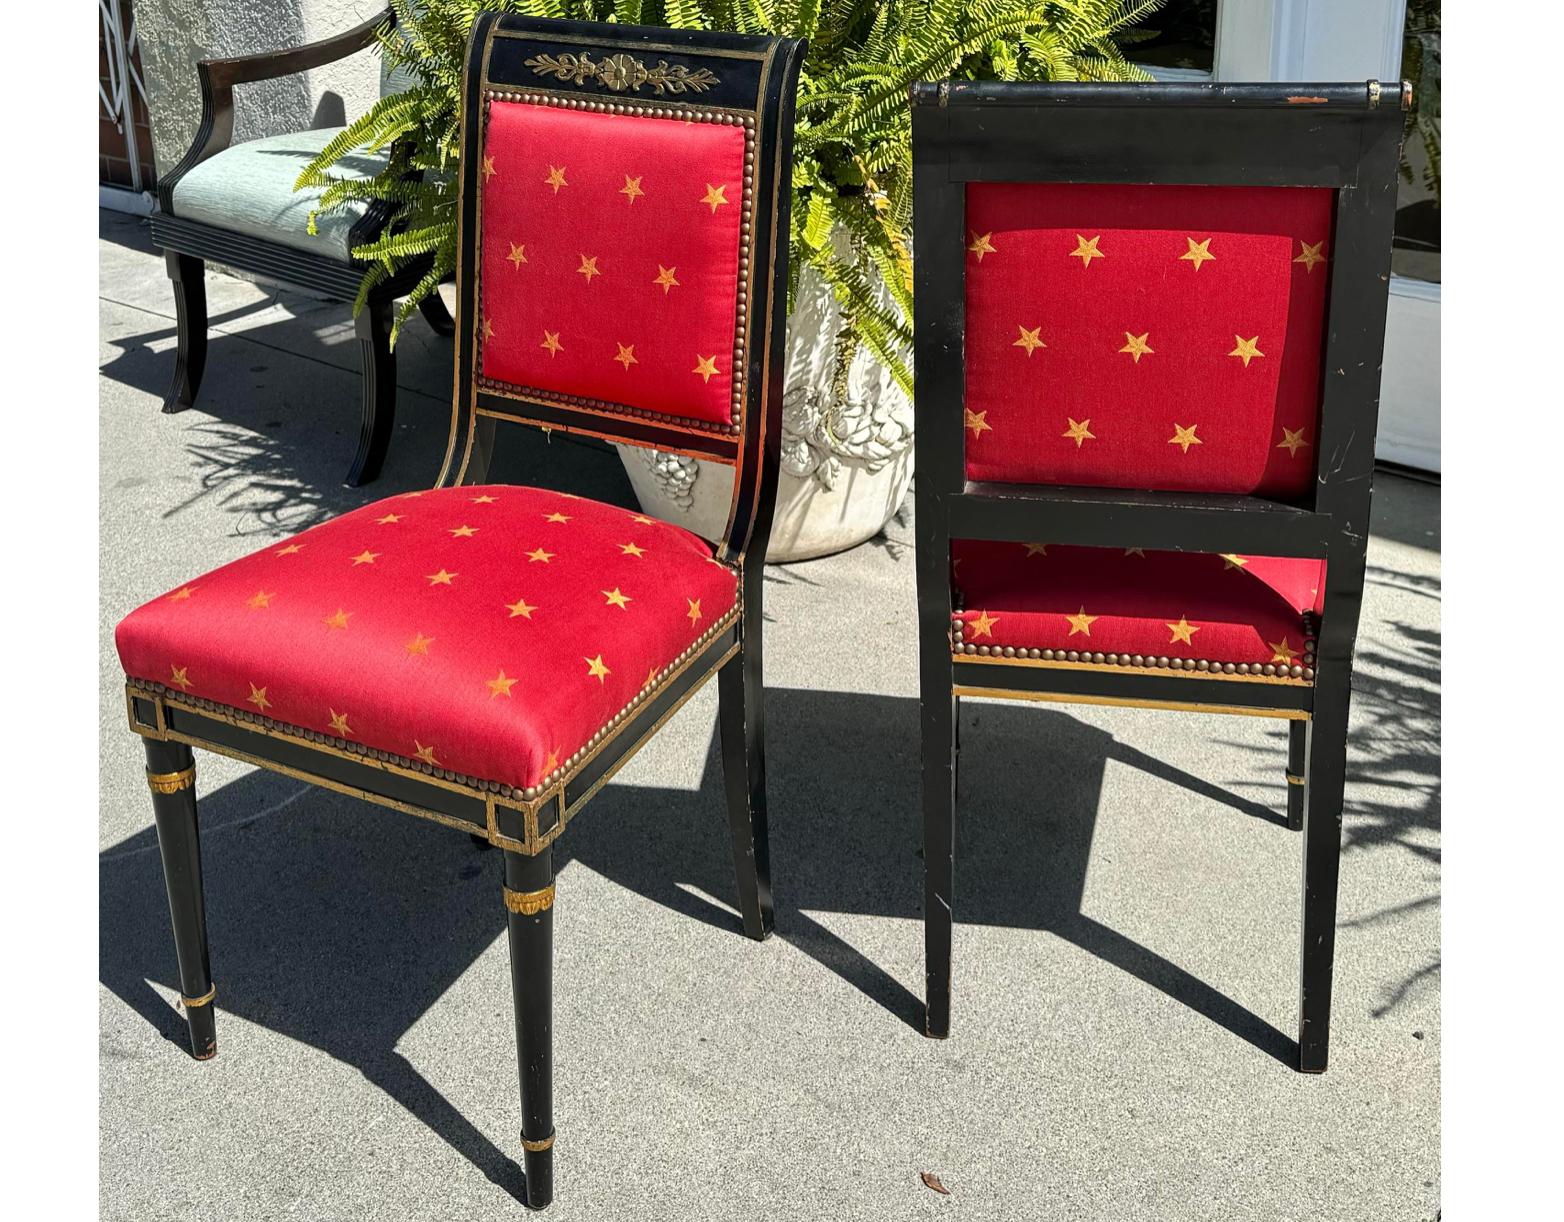 Pair of Antique Empire Black & Gold Chairs W Red Clarence House Seats.  Each has been freshly upholstered in red Clarence House fabric with gold stars. This listing is from one pair of chairs but we actually have three pair available. 